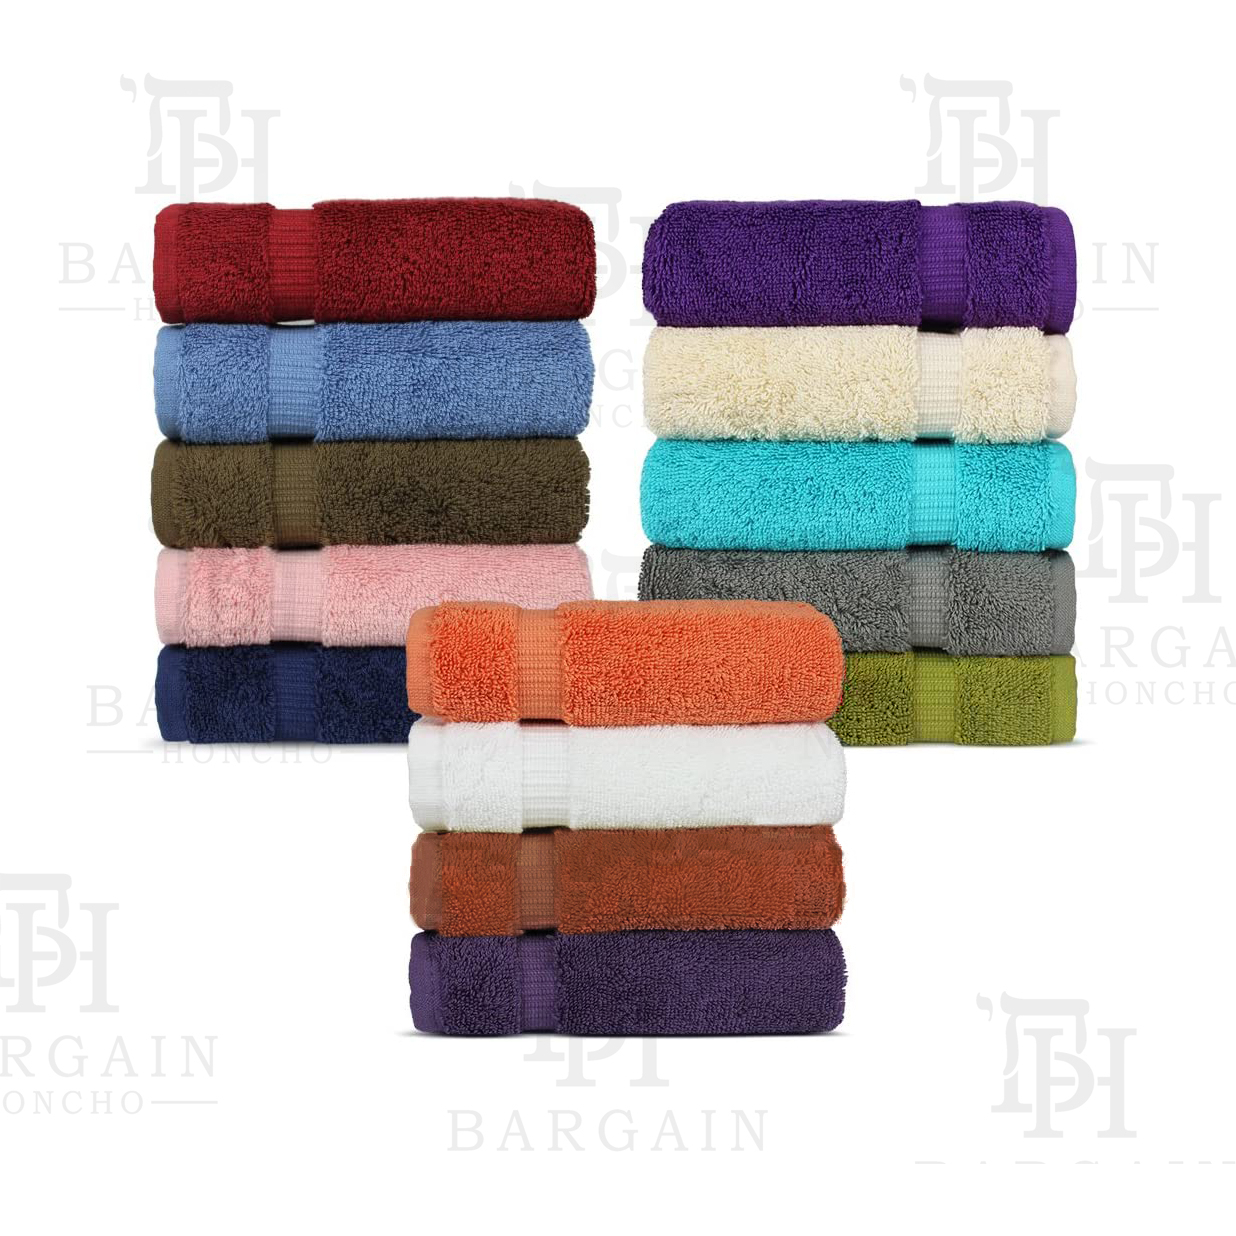 10-Pack: Absorbent 100% Cotton Kitchen Dish Cloths 12x12 Face Wash Cloth - Assorted Colors